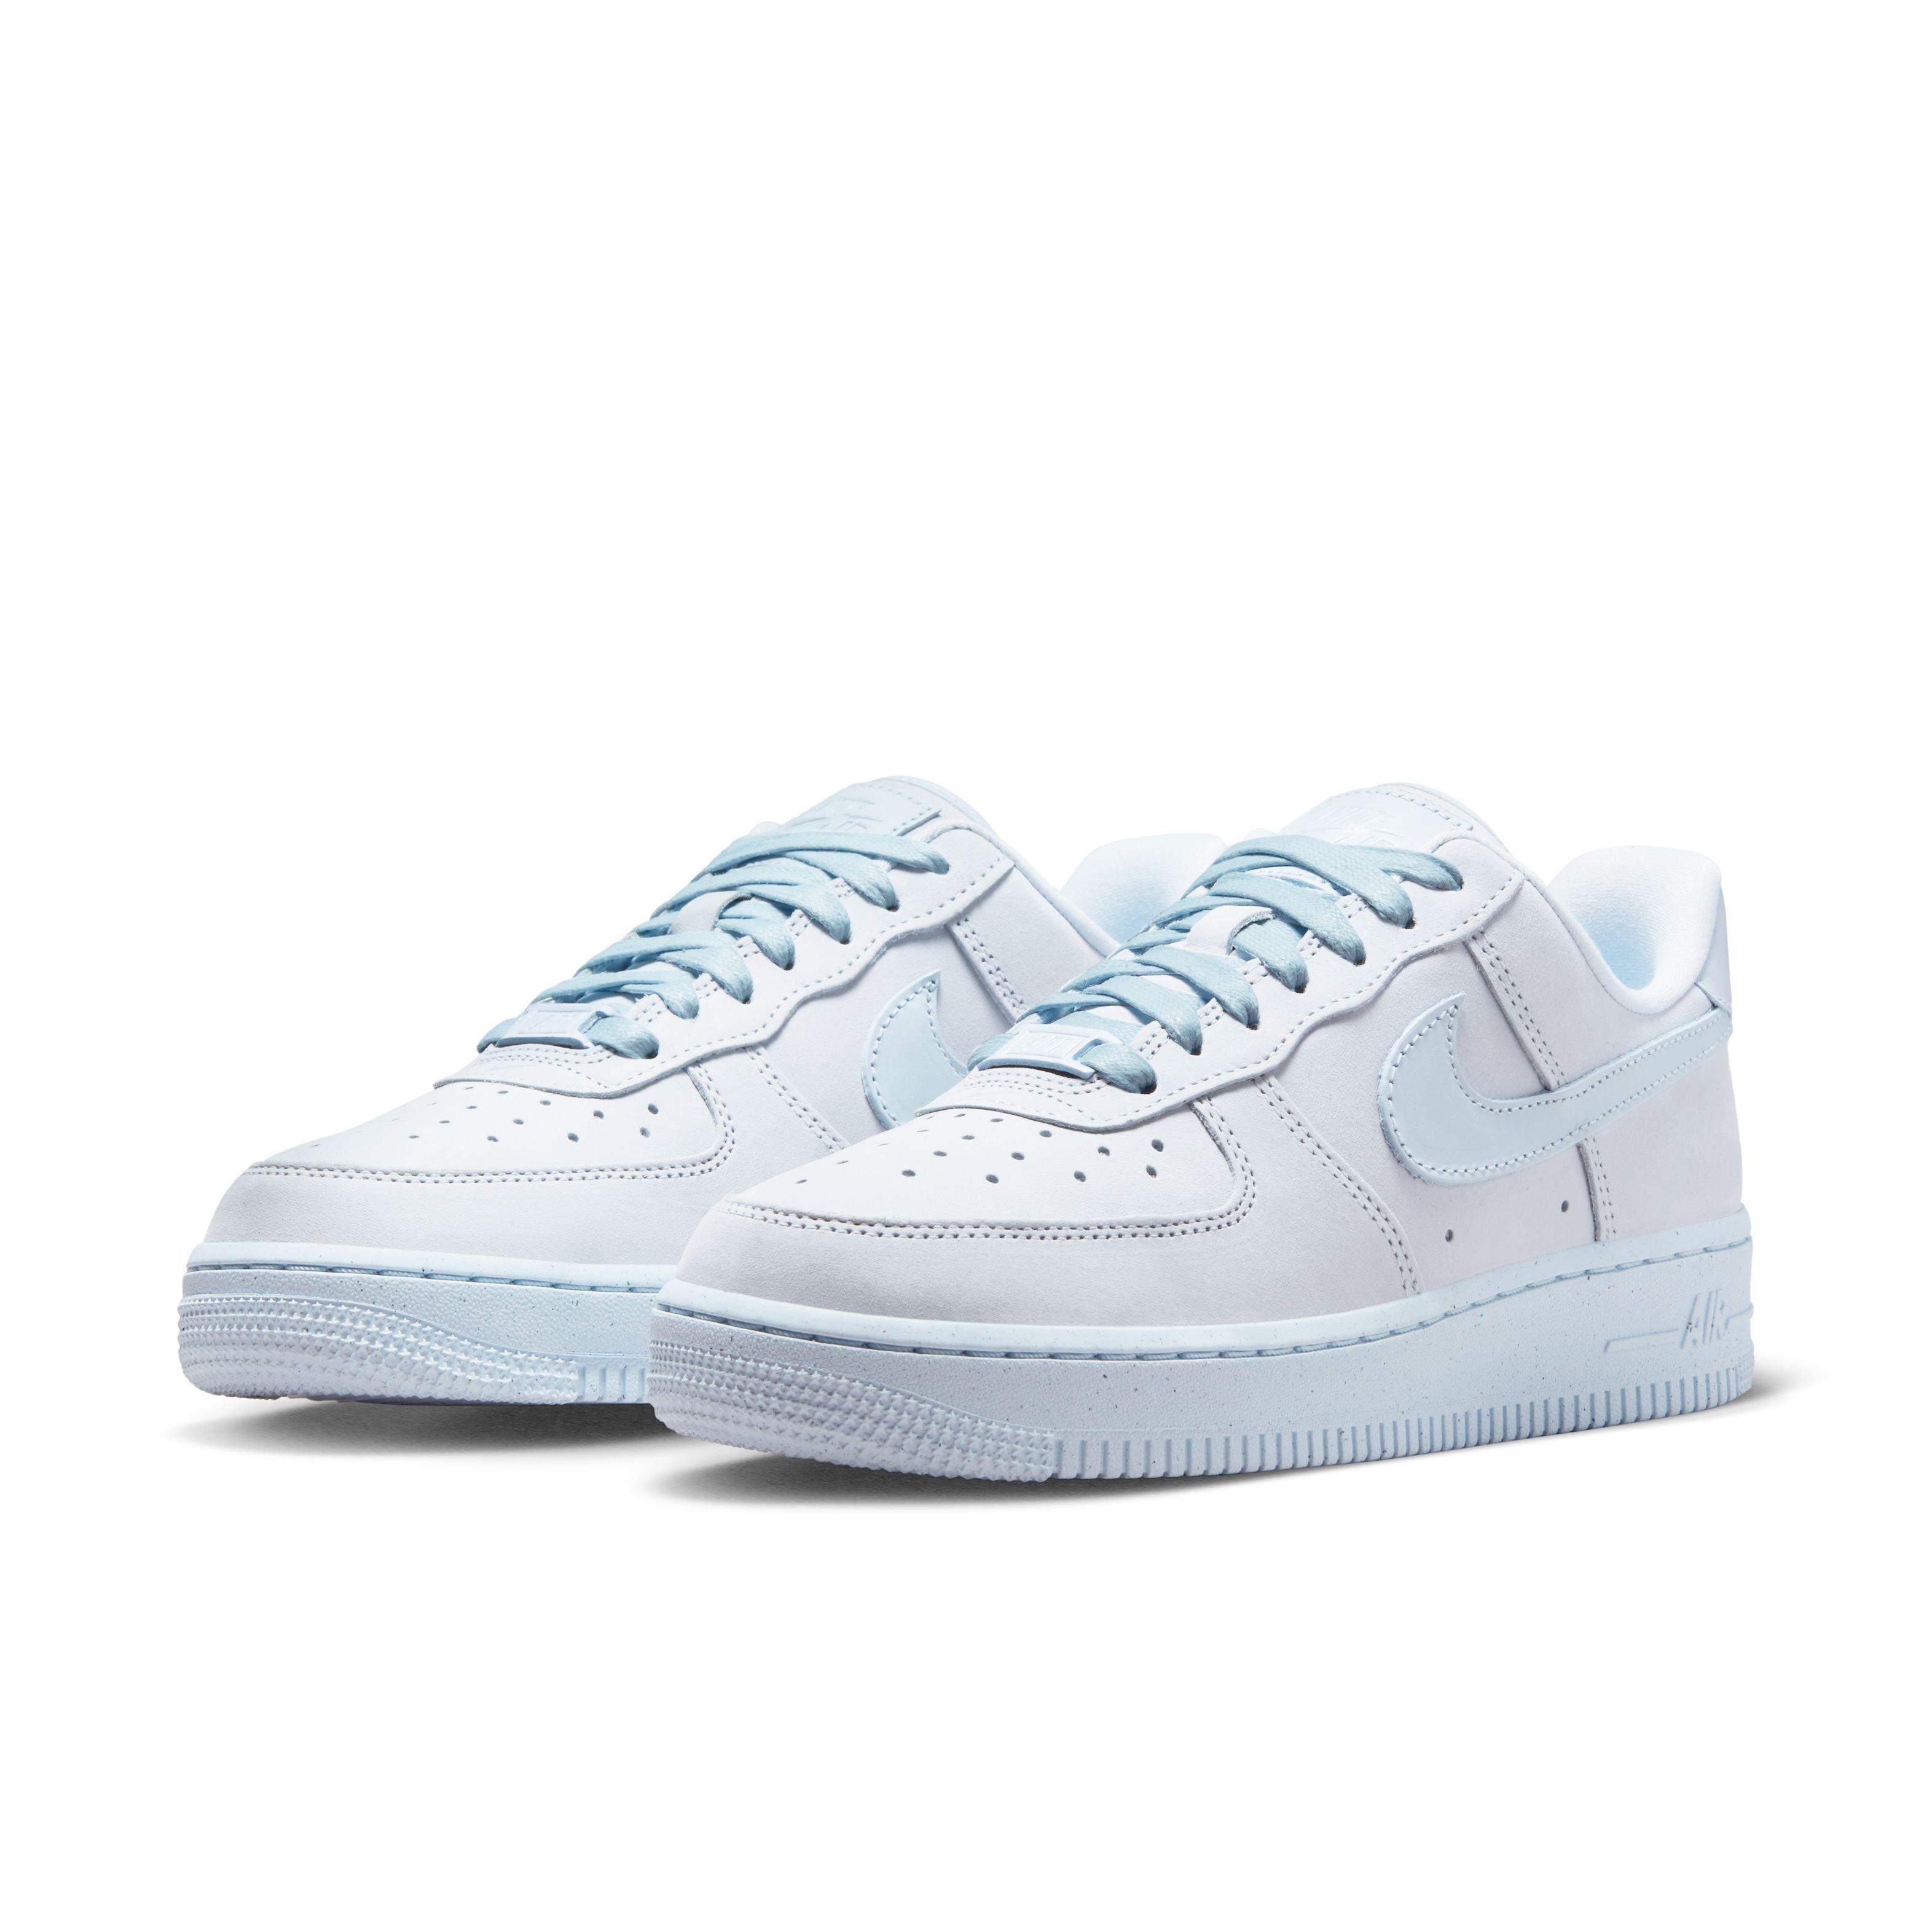 Hibbett on X: Is the Air Force 1 the world's most recognizable